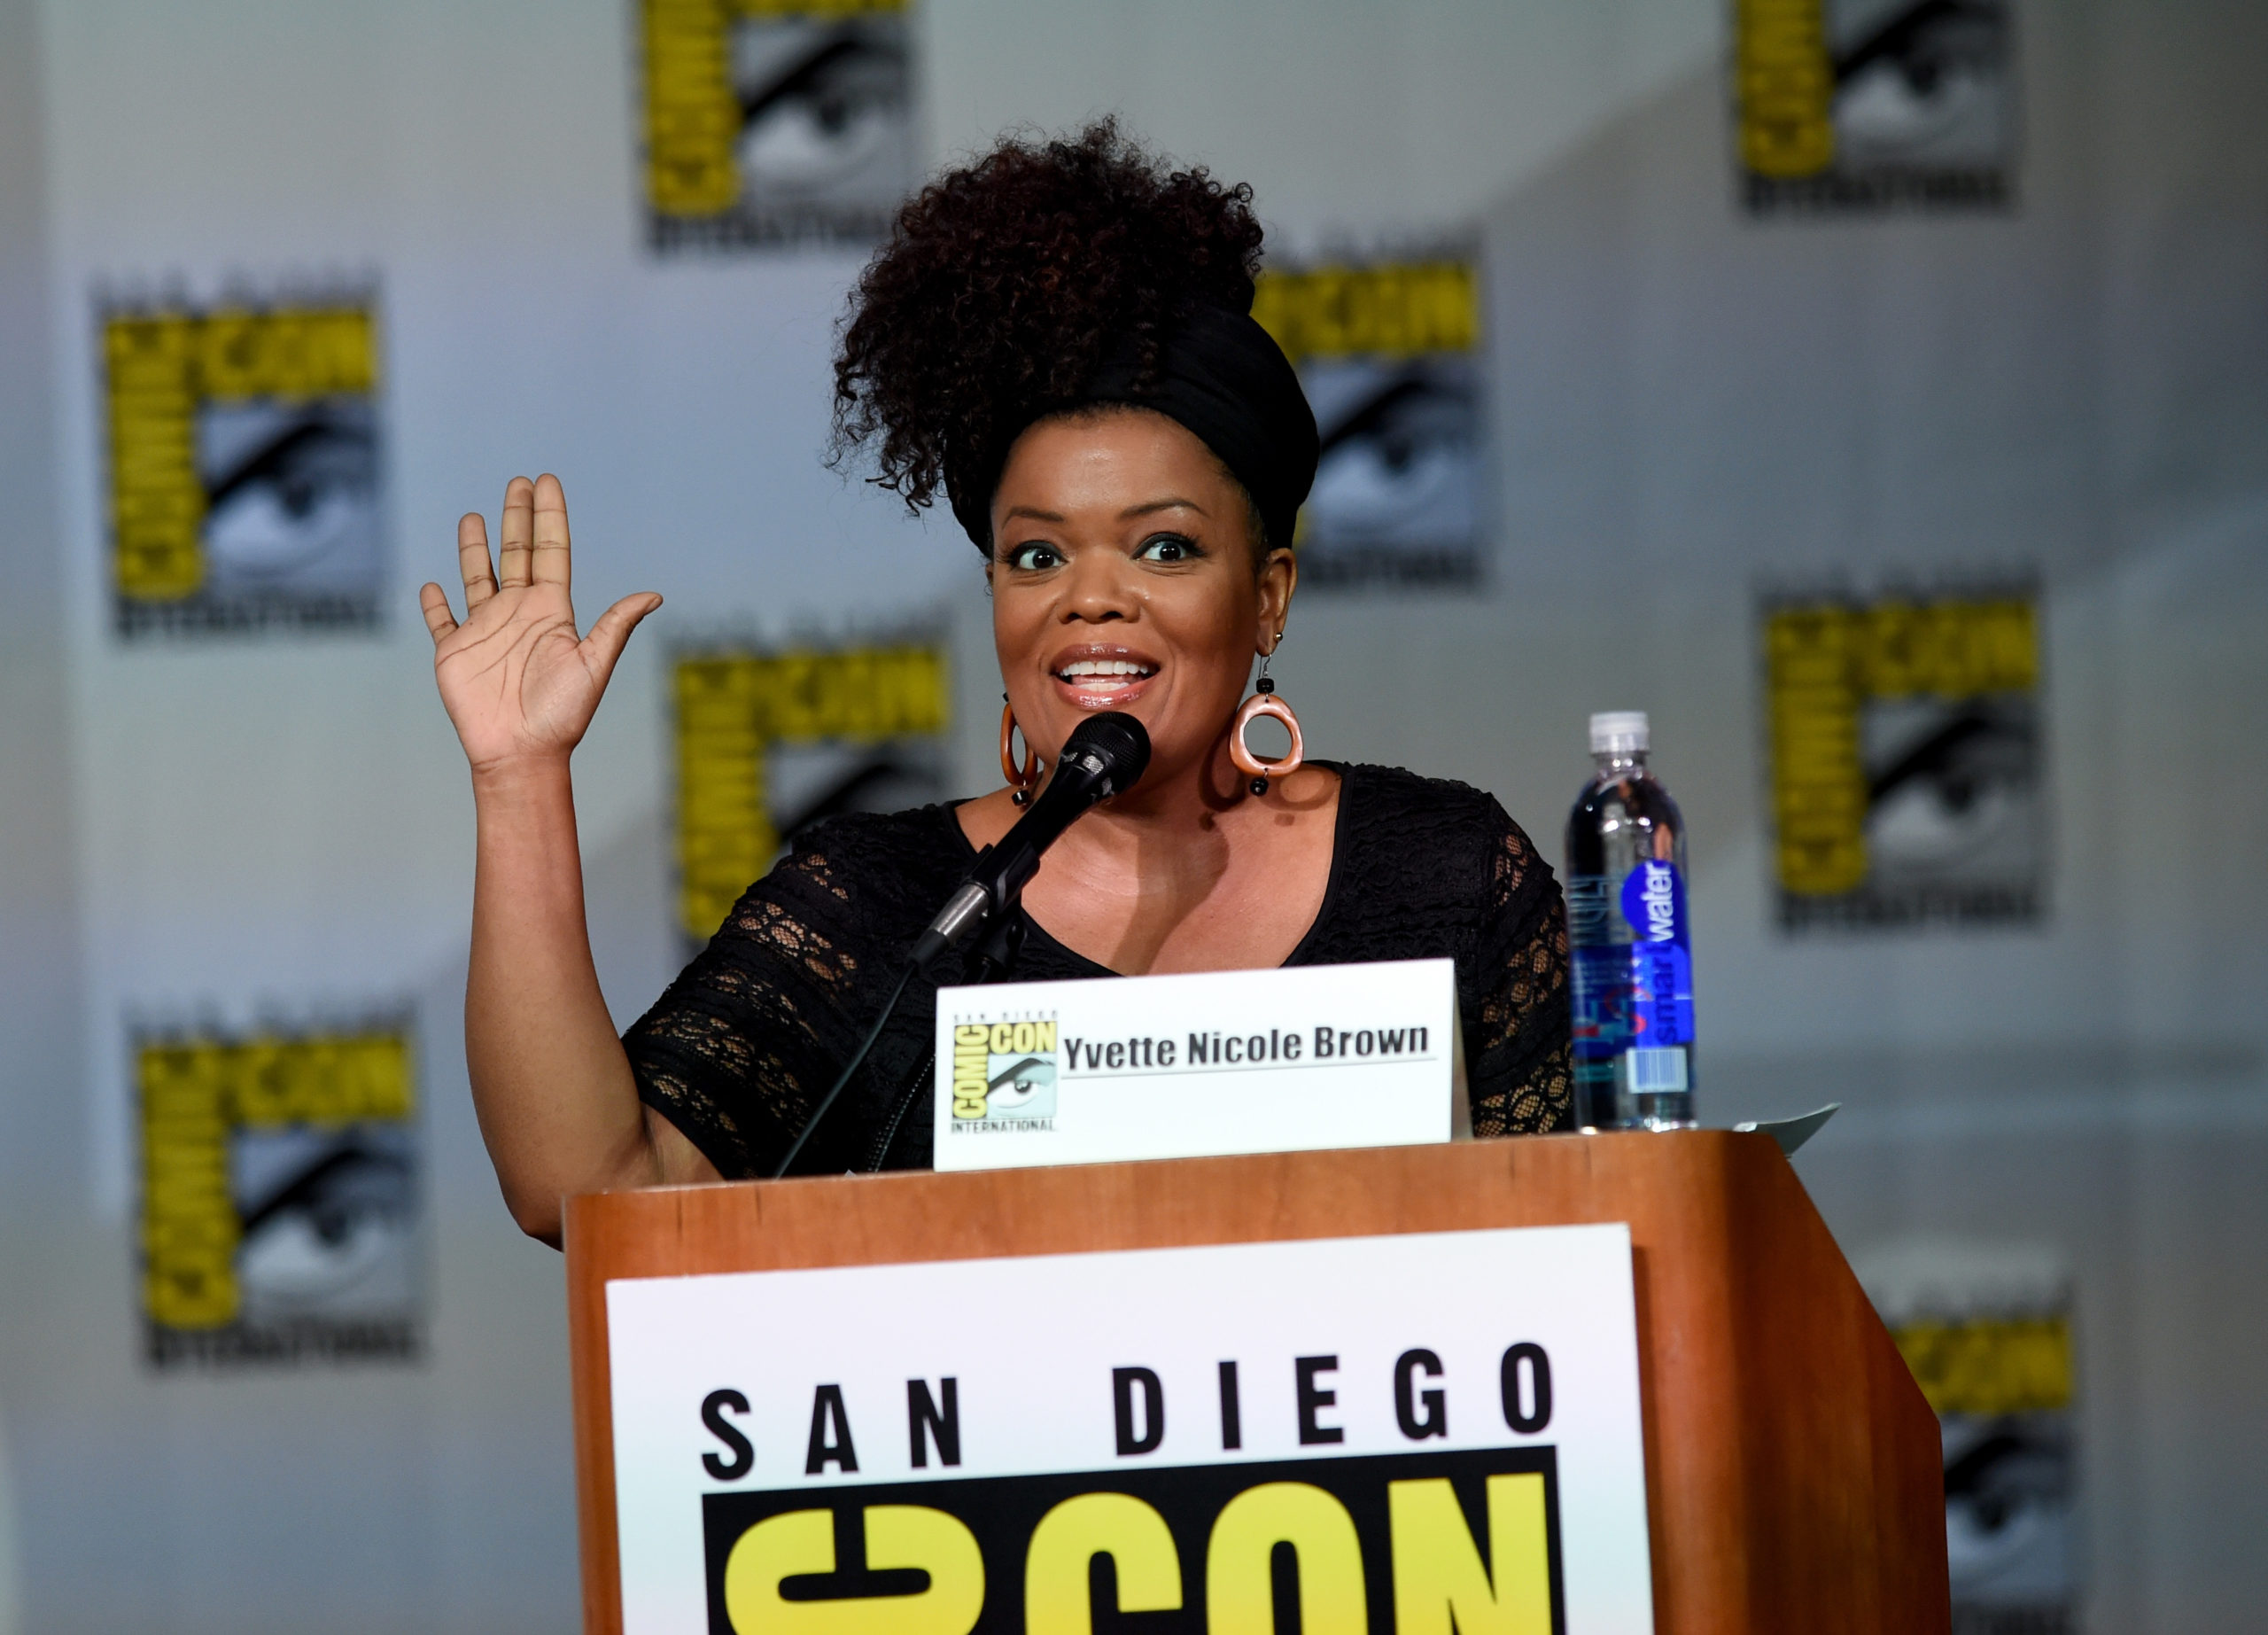 Yvette Nicole Brown Previews Whatâ€™s to Come on the ABC Comedy.